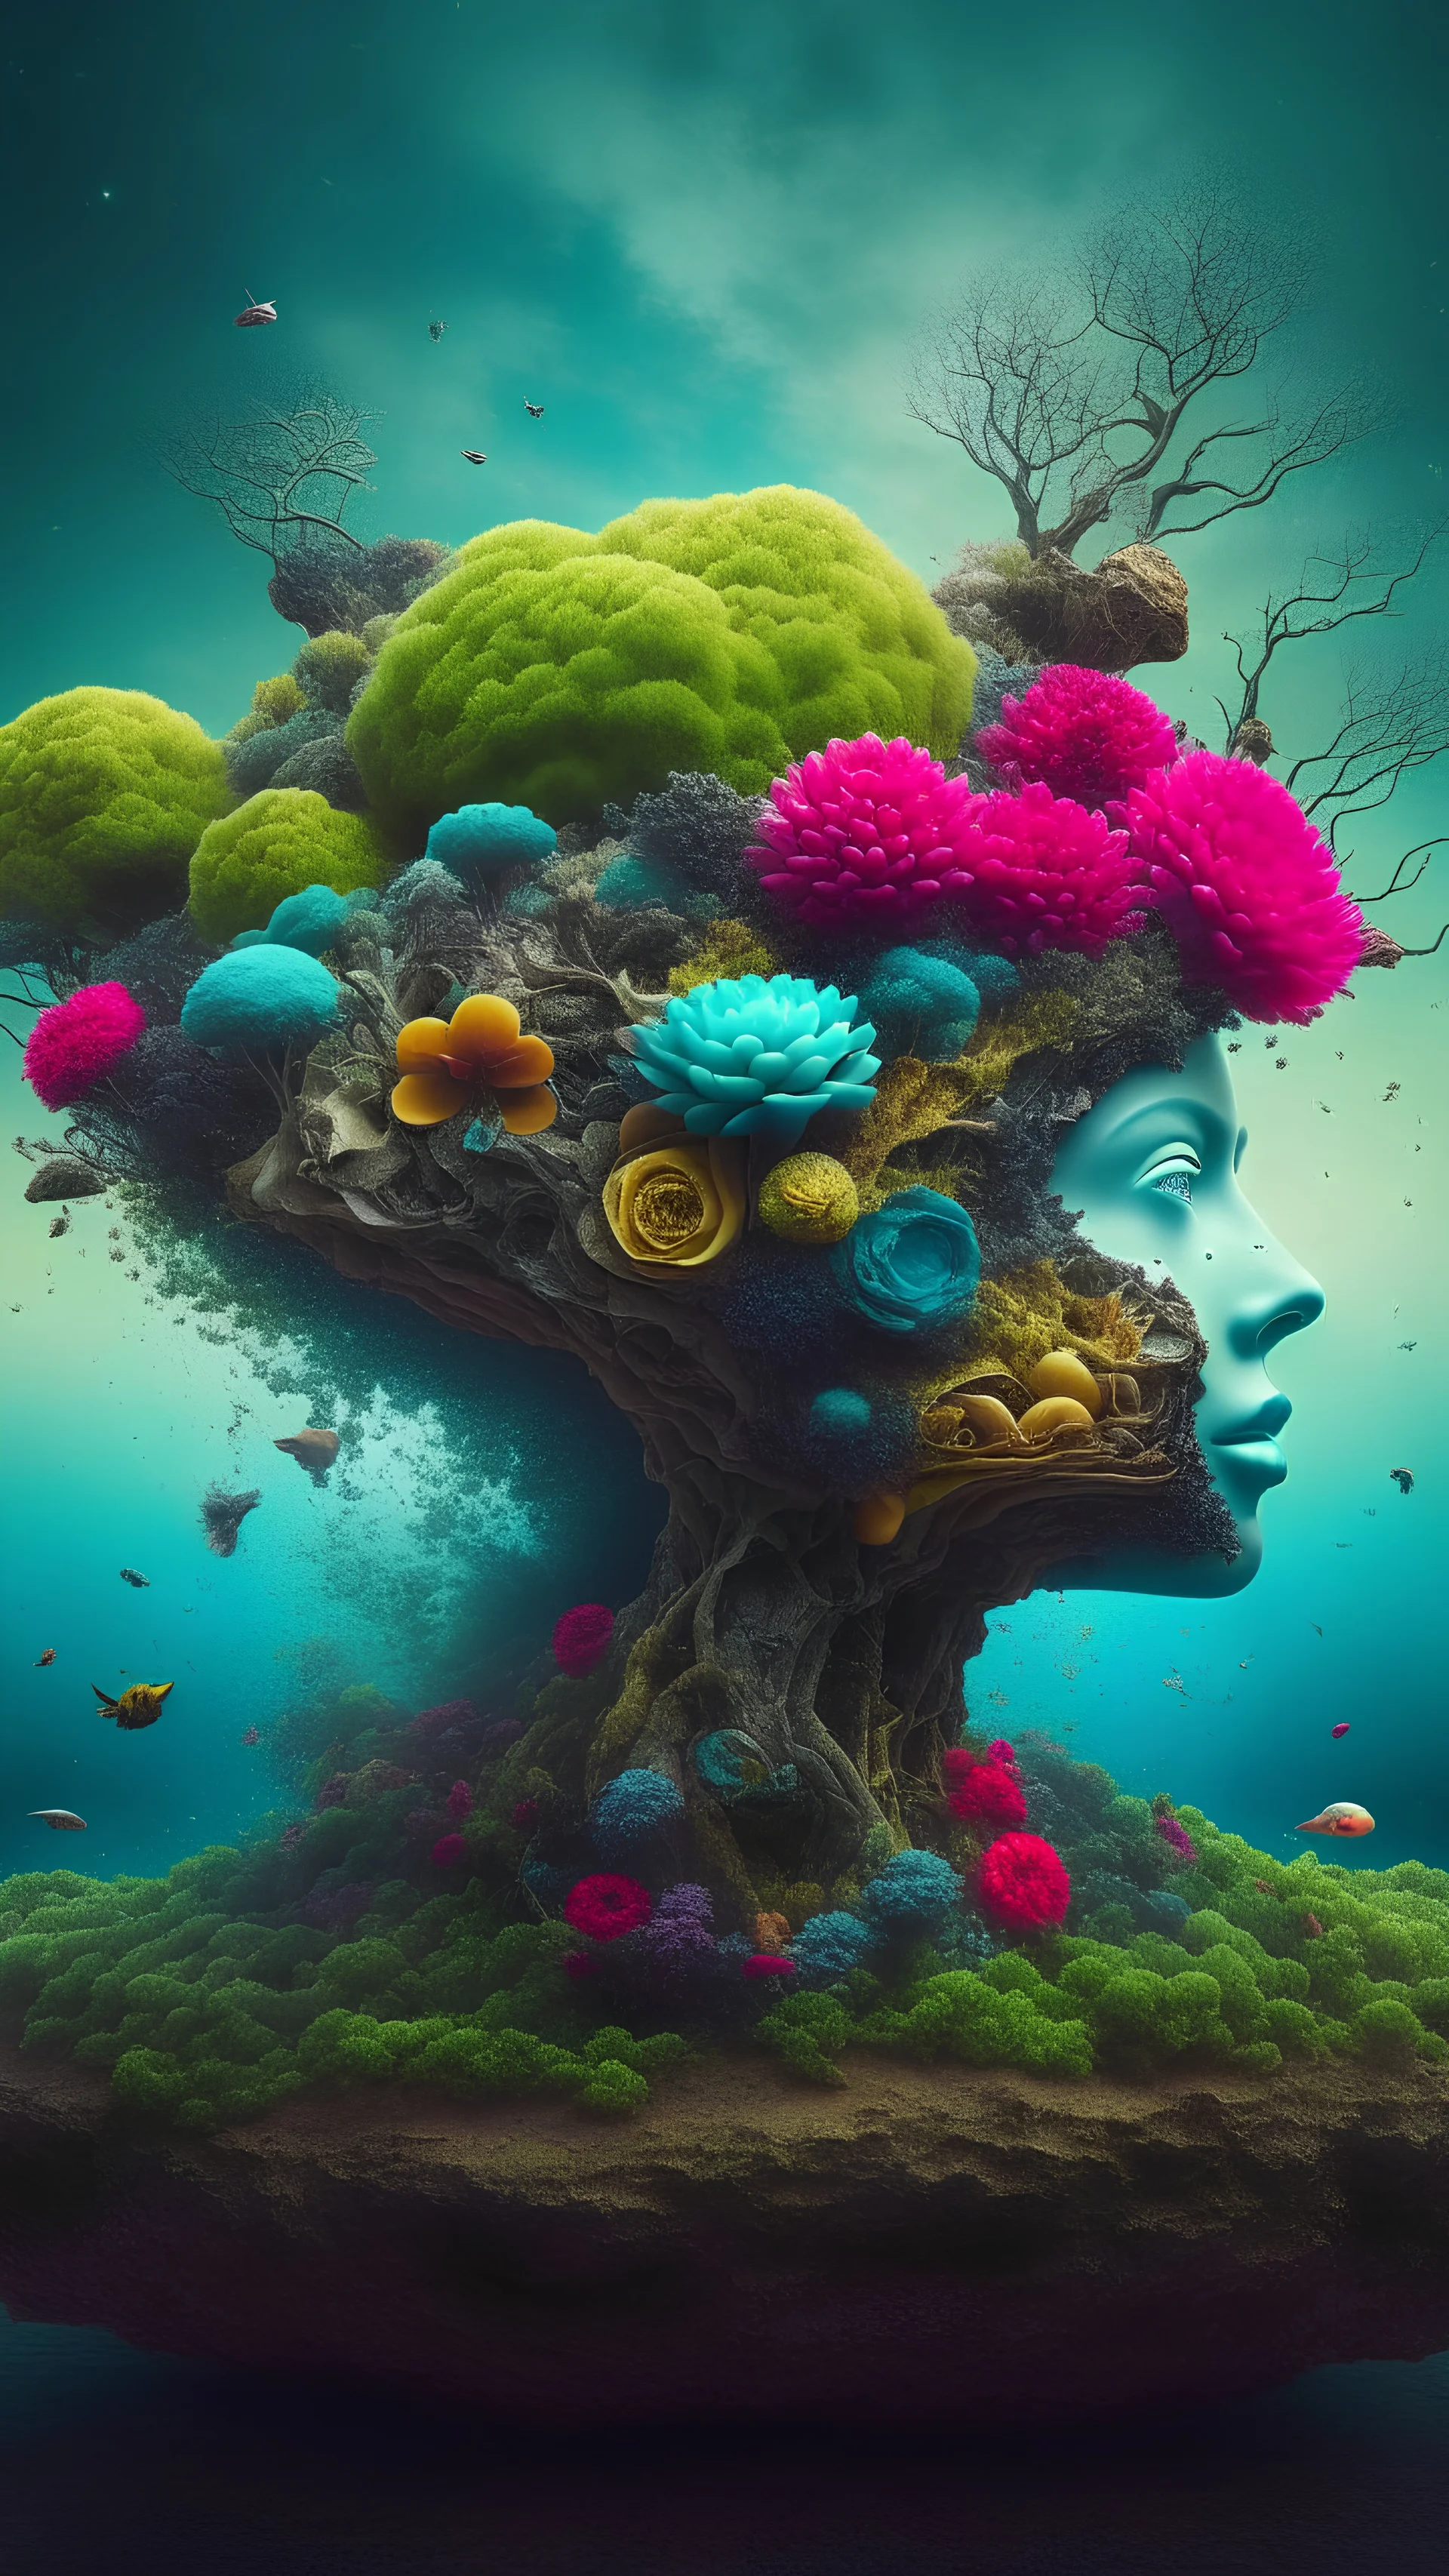 surreal abstract artwork that combines elements of nature, technology and human emotions